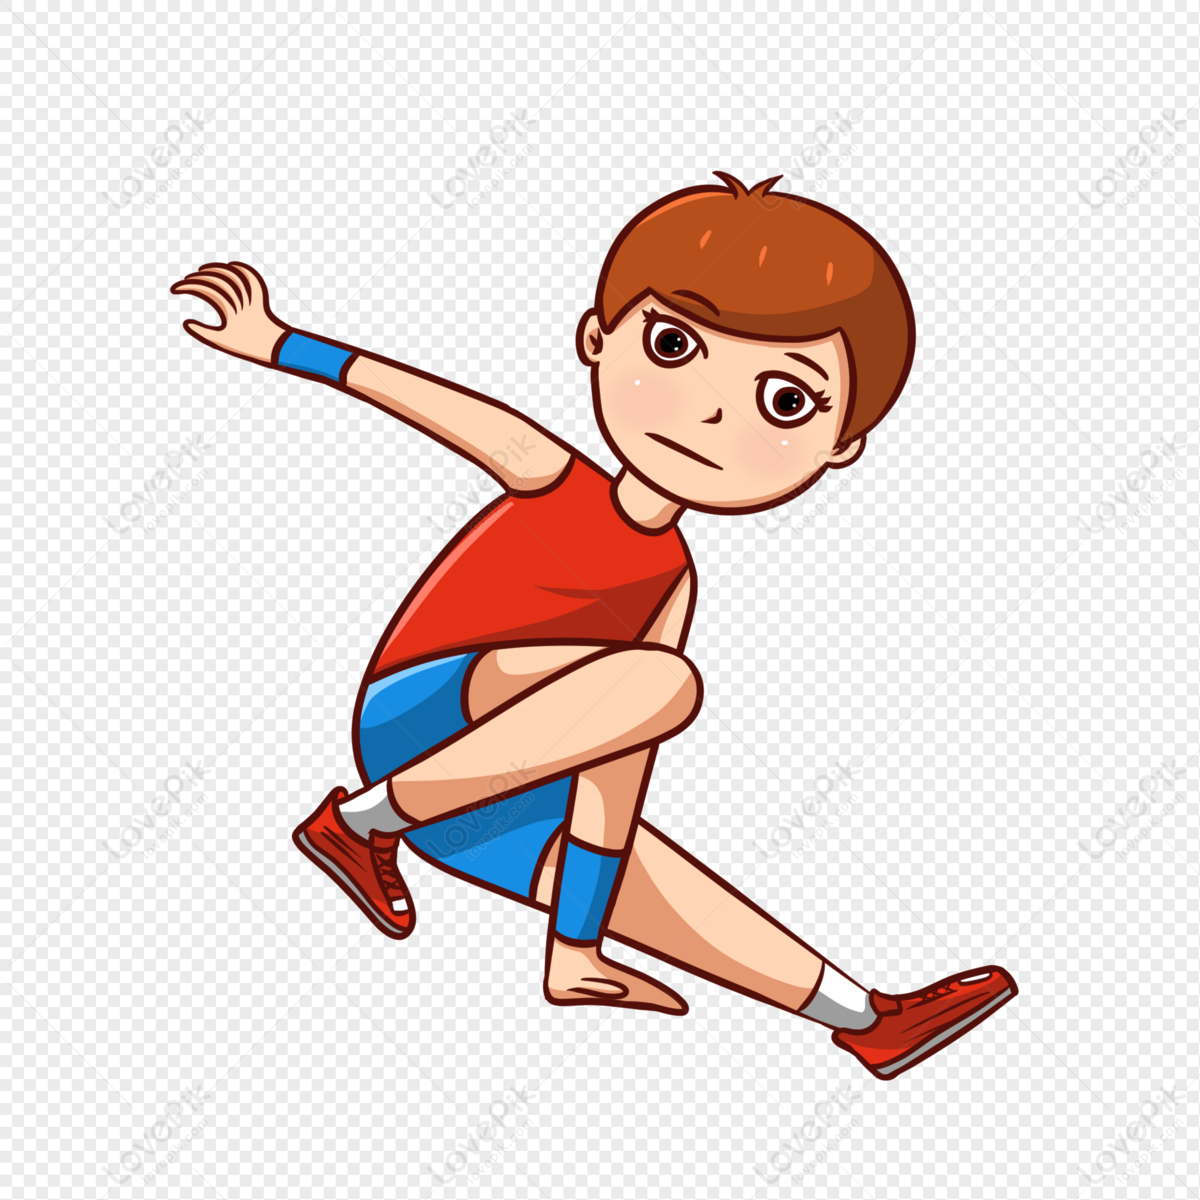 Boy Dancing Hip Hop Free PNG And Clipart Image For Free Download - Lovepik  | 401460829